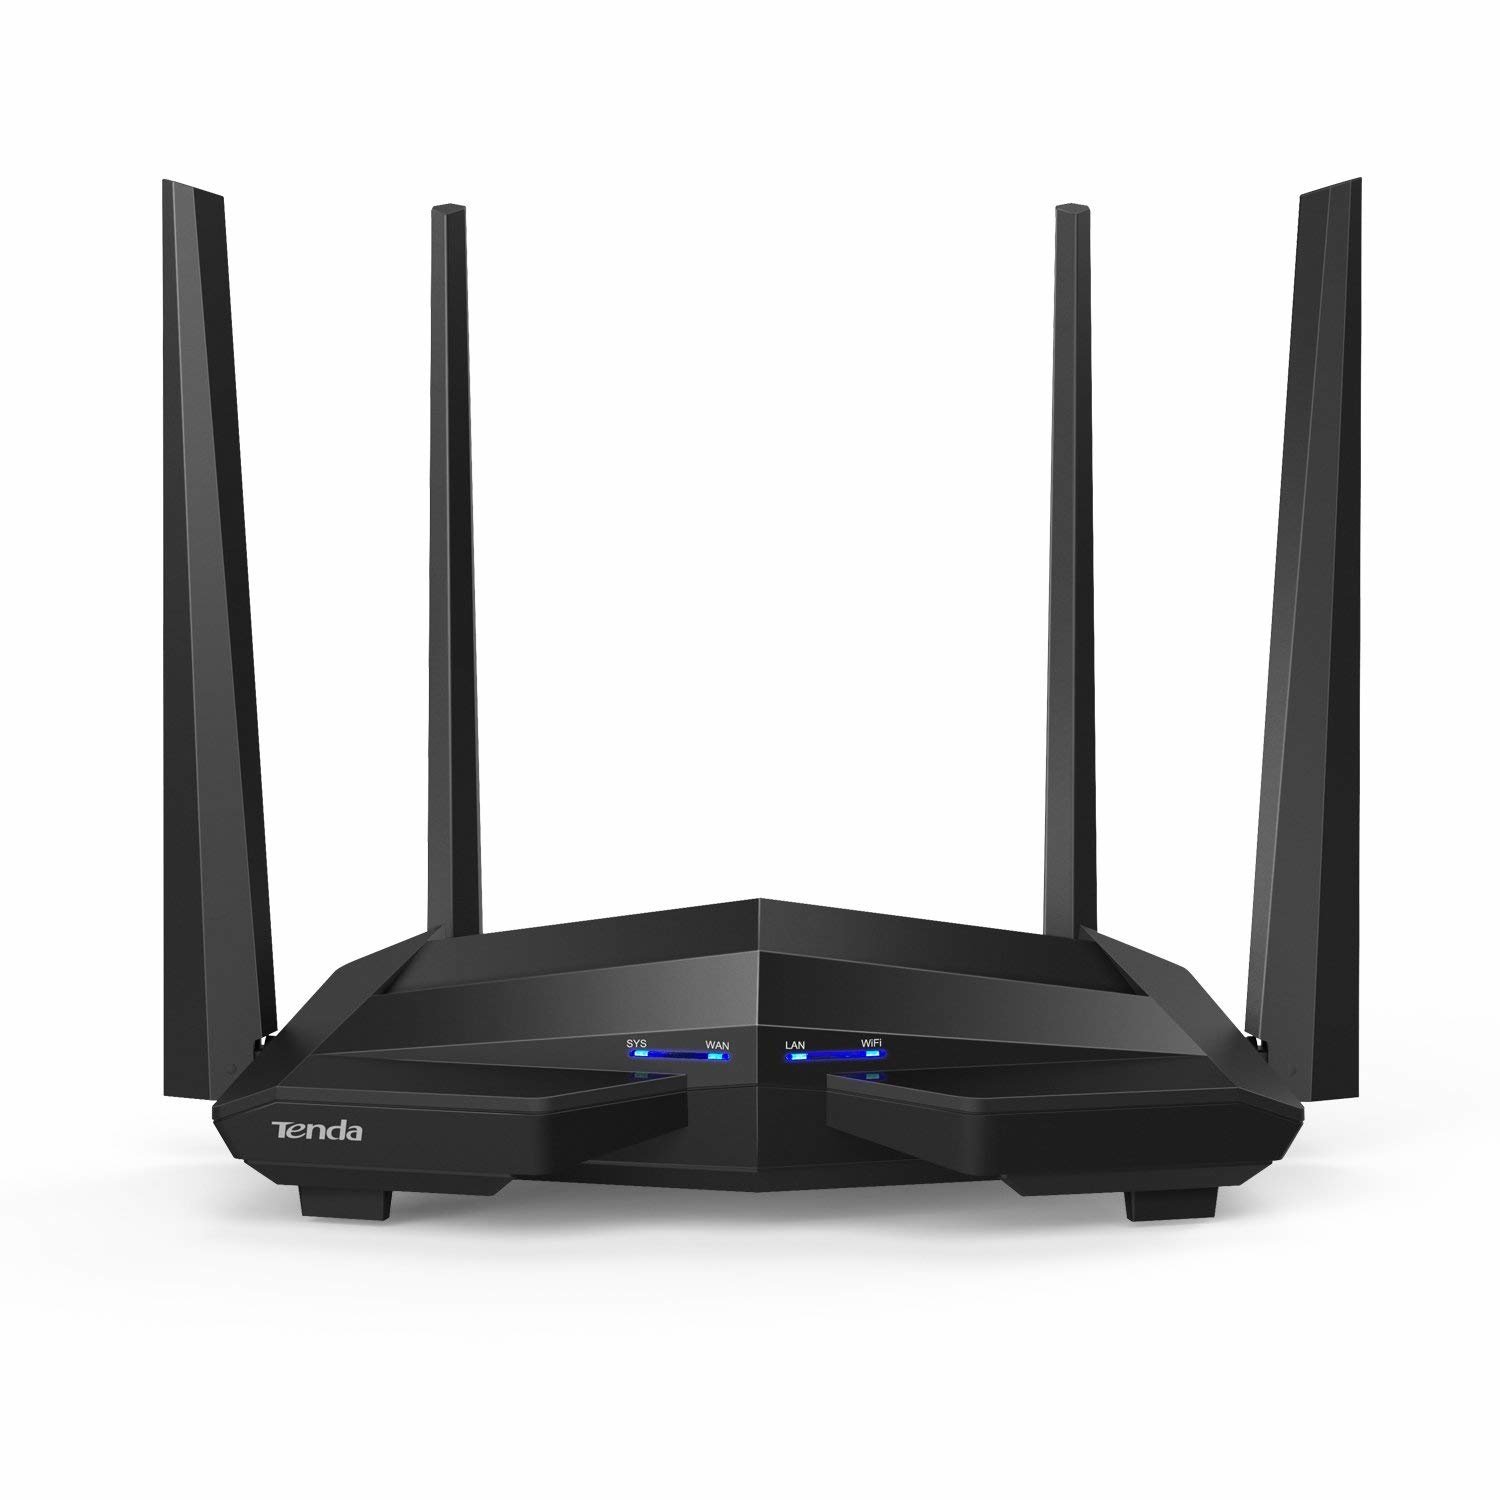 Wireless Routers & Access Points - NWCA Inc.